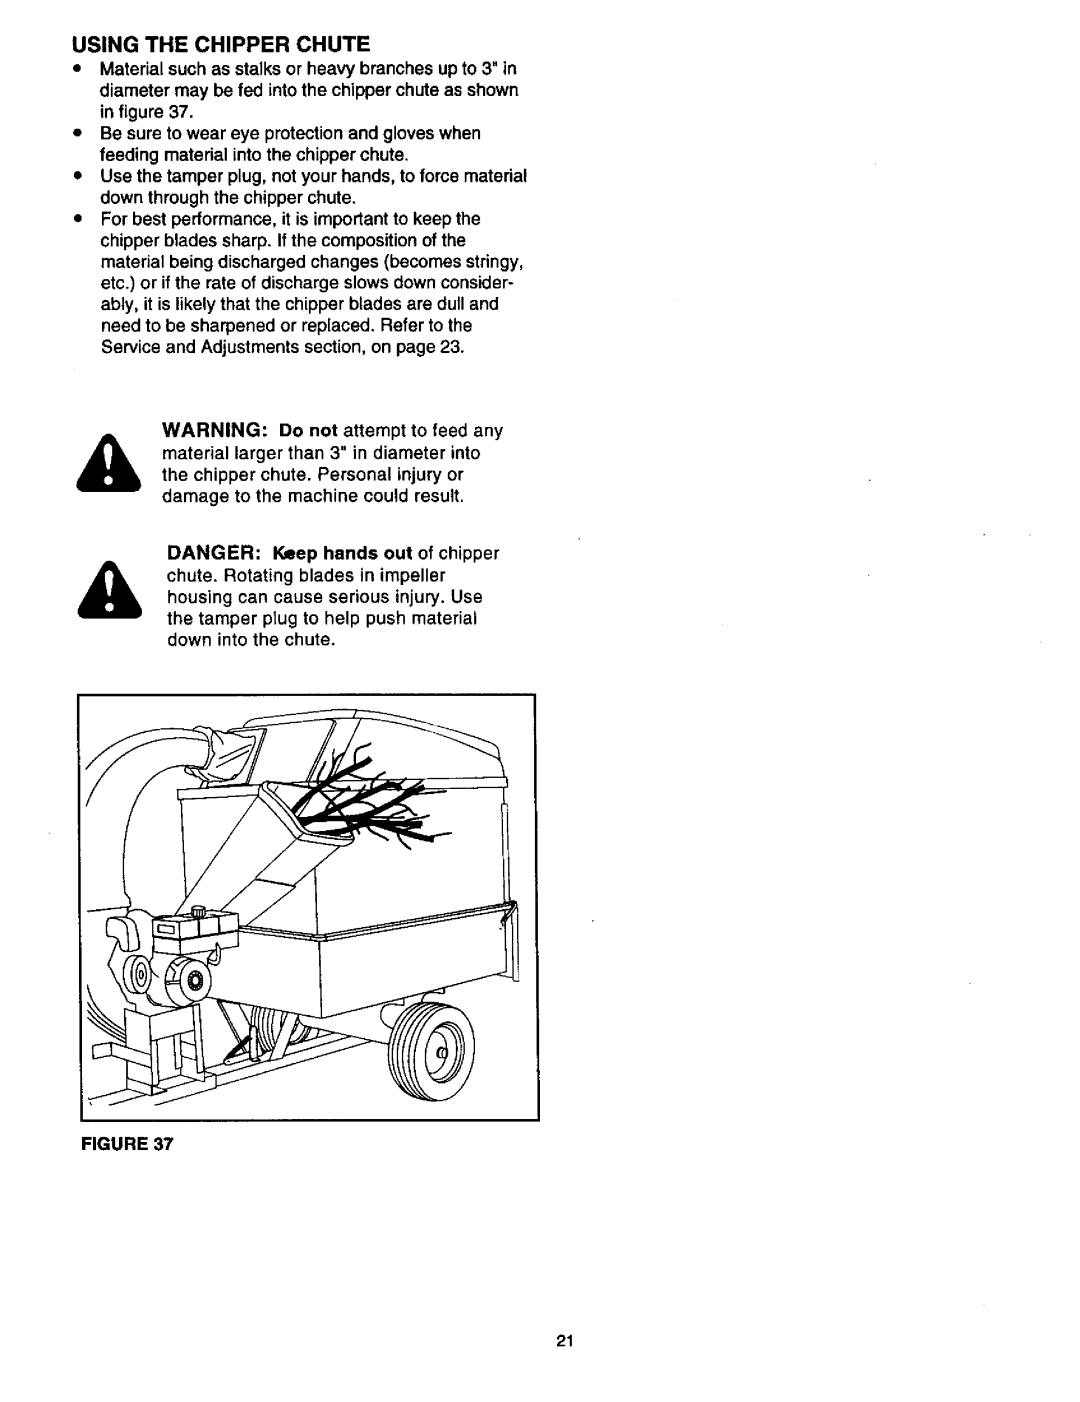 Craftsman 486.24516 manual Using The Chipper Chute, the tamper plug to help push material, Figure 